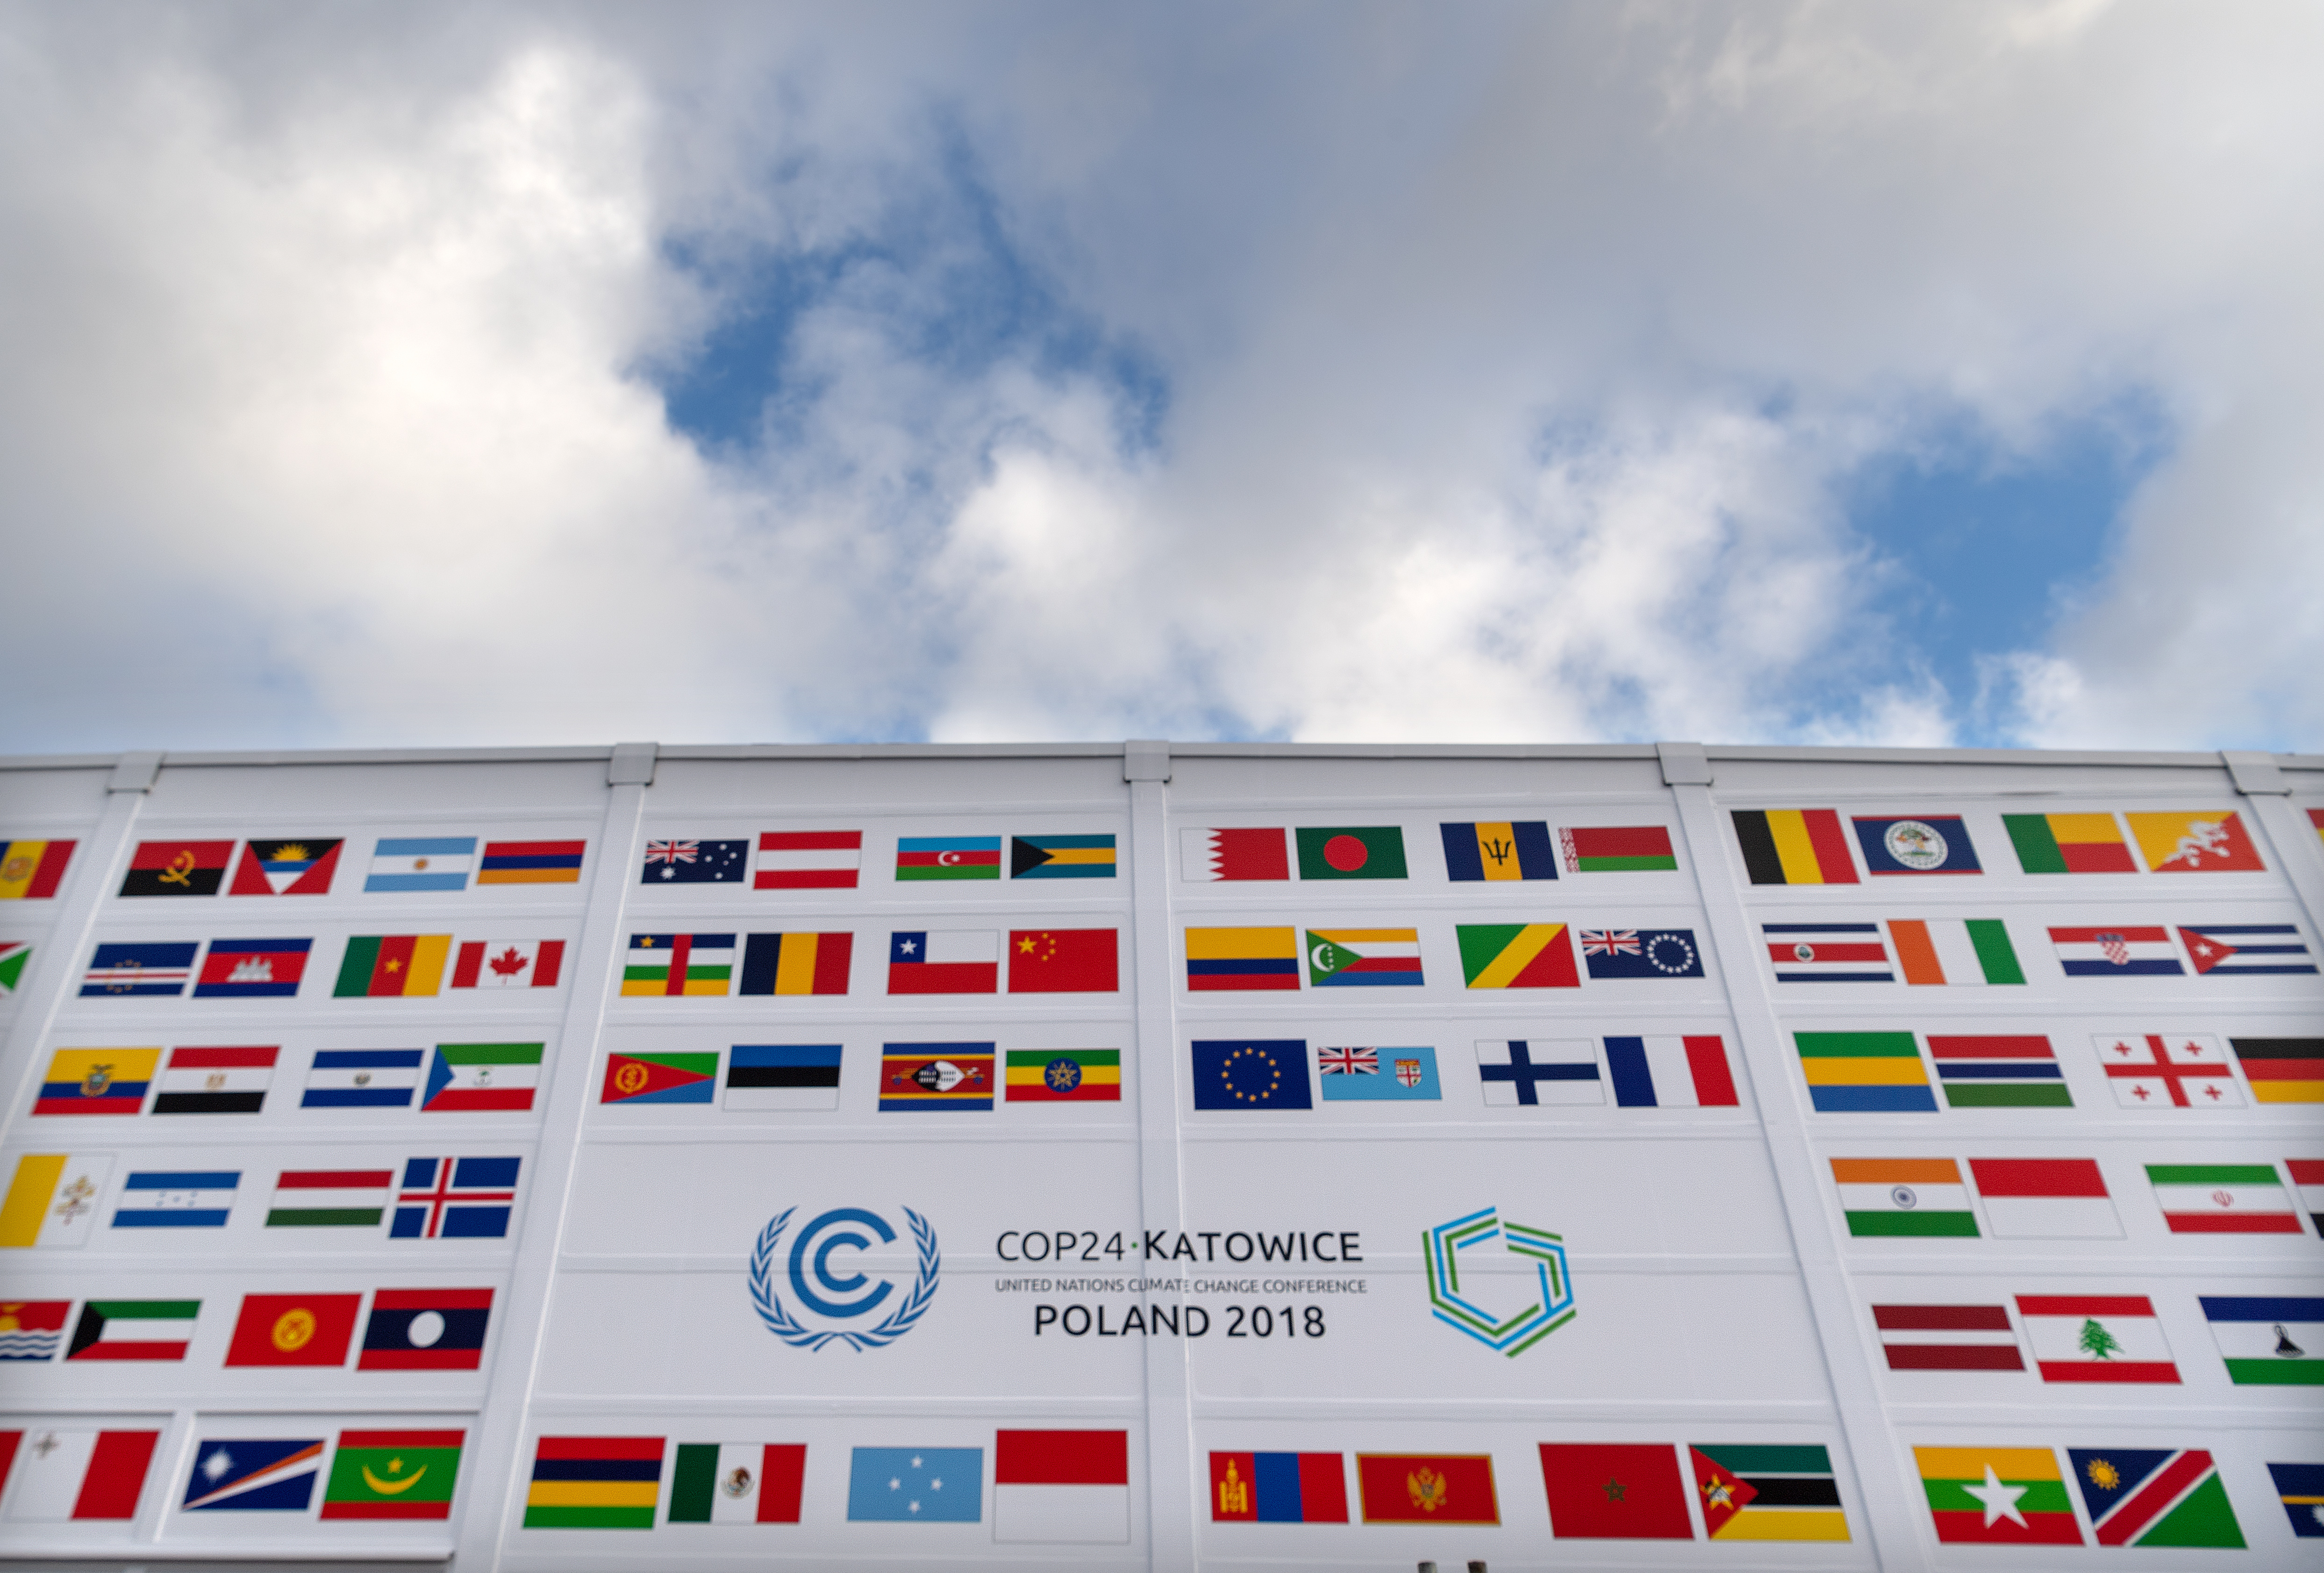 'Great sense of hope' despite disappointment at climate talks